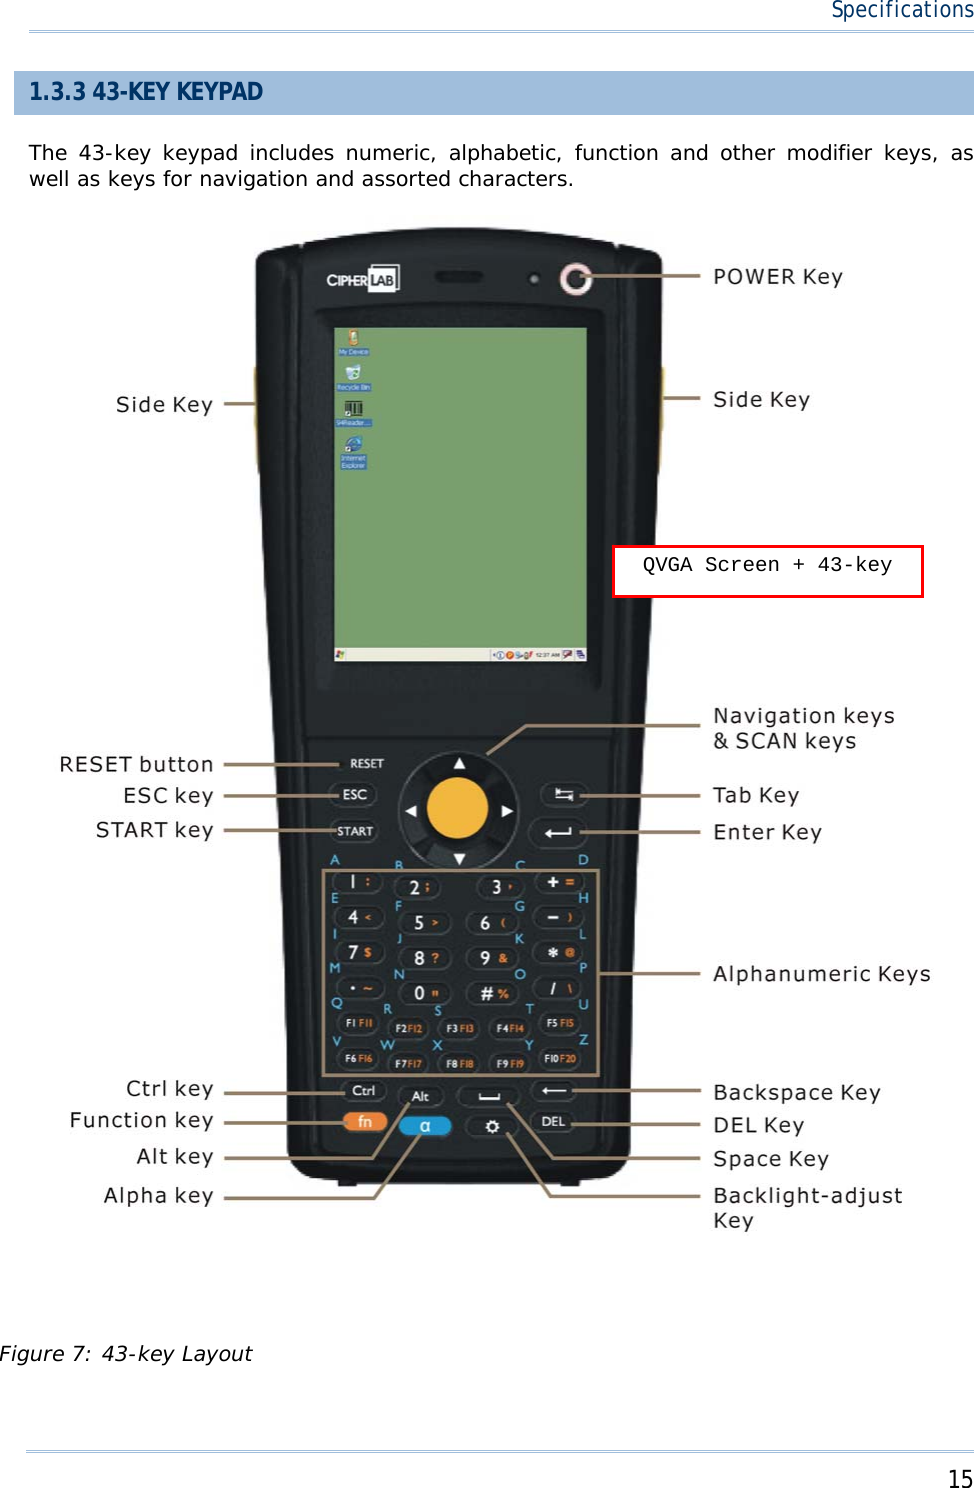     15   Specifications  1.3.3 43-KEY KEYPAD The 43-key keypad includes numeric, alphabetic, function and other modifier keys, as well as keys for navigation and assorted characters.  QVGA Screen + 43-key    Figure 7: 43-key Layout    